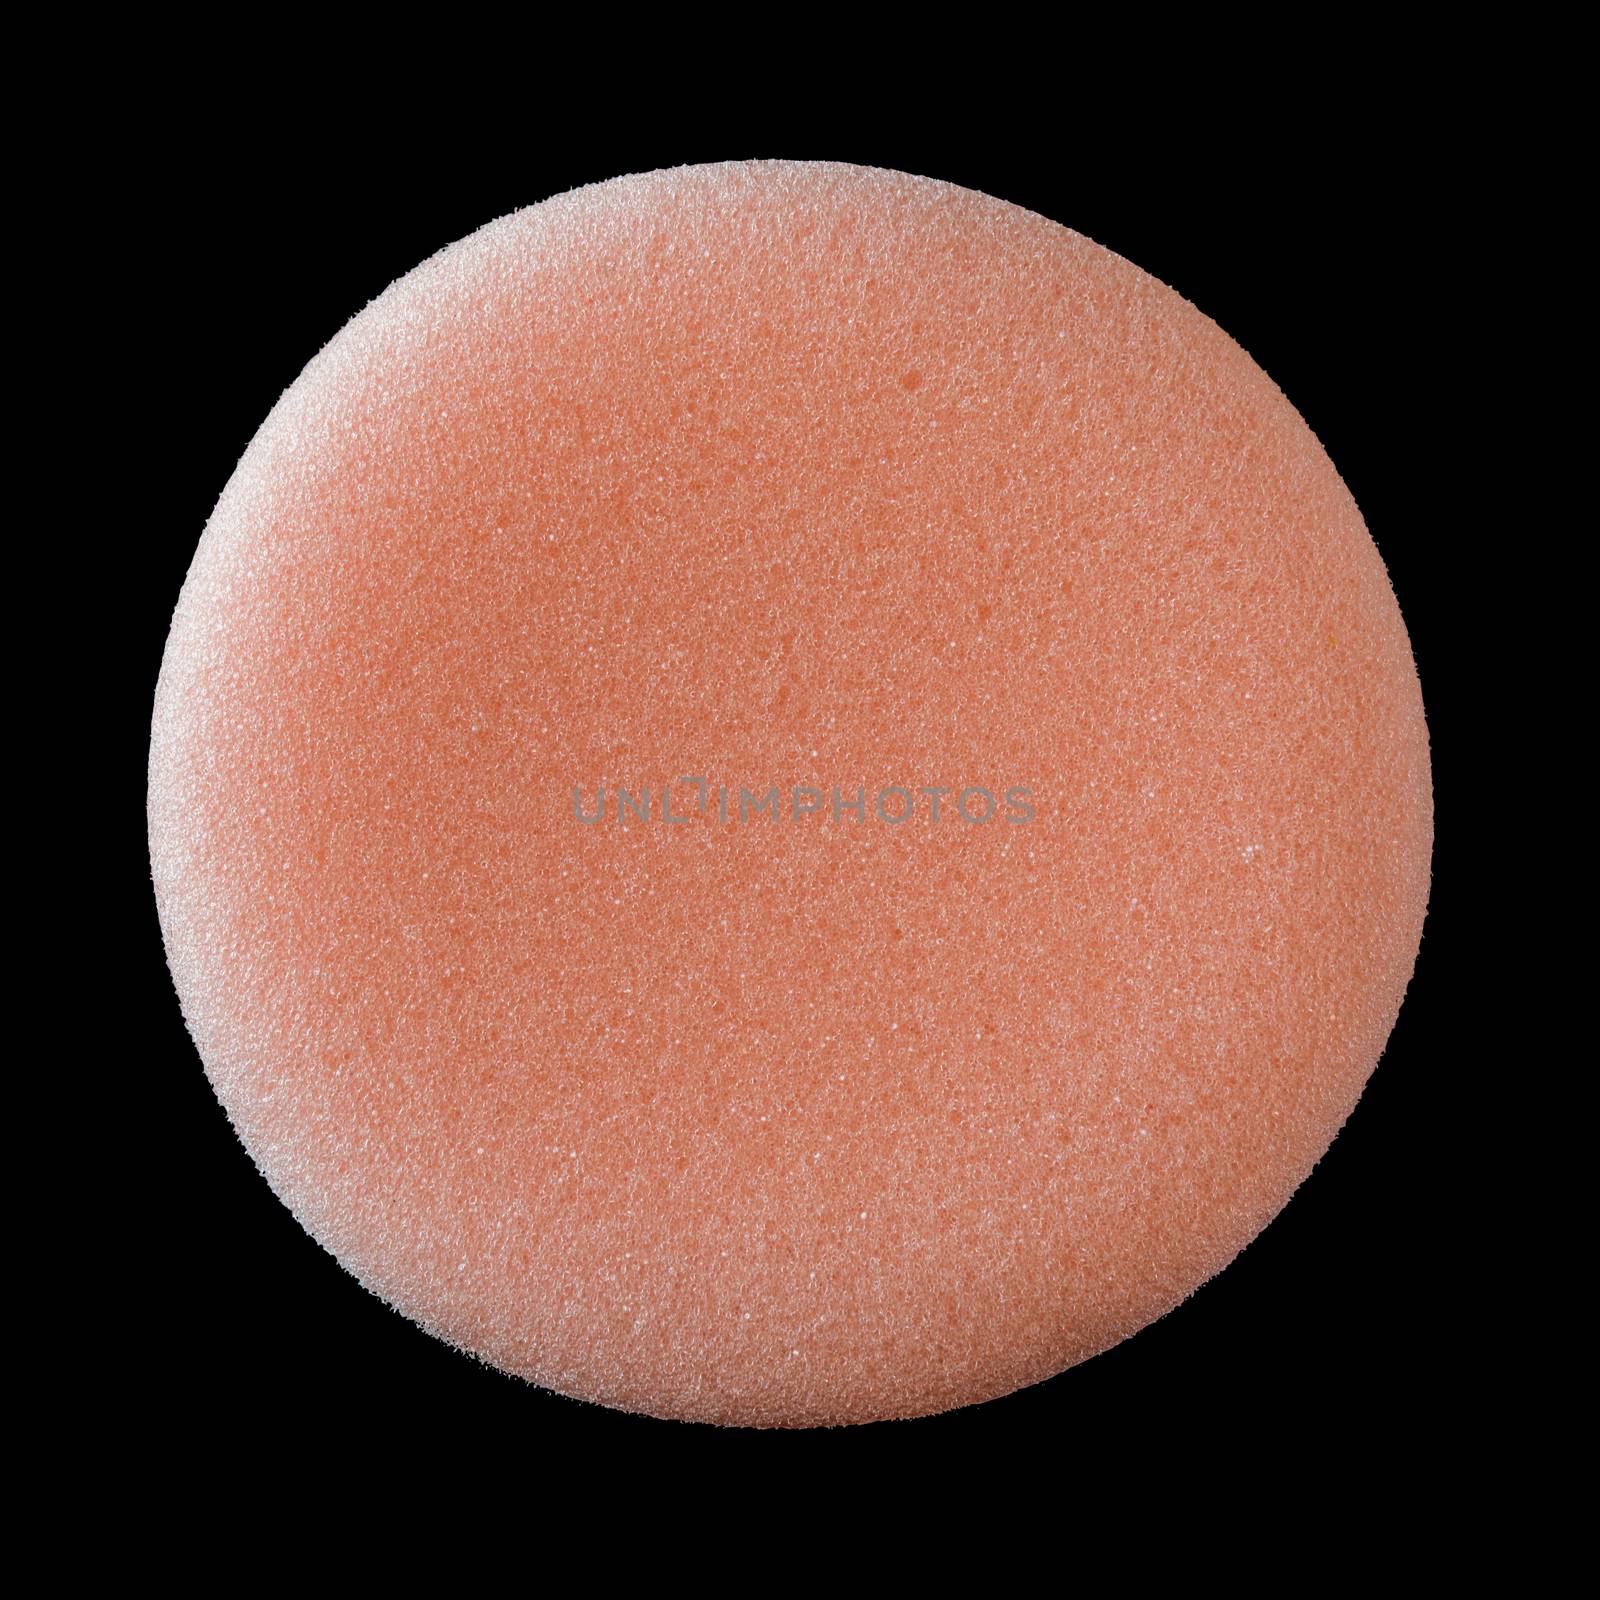 cosmetic sponges on black background, Clipping path